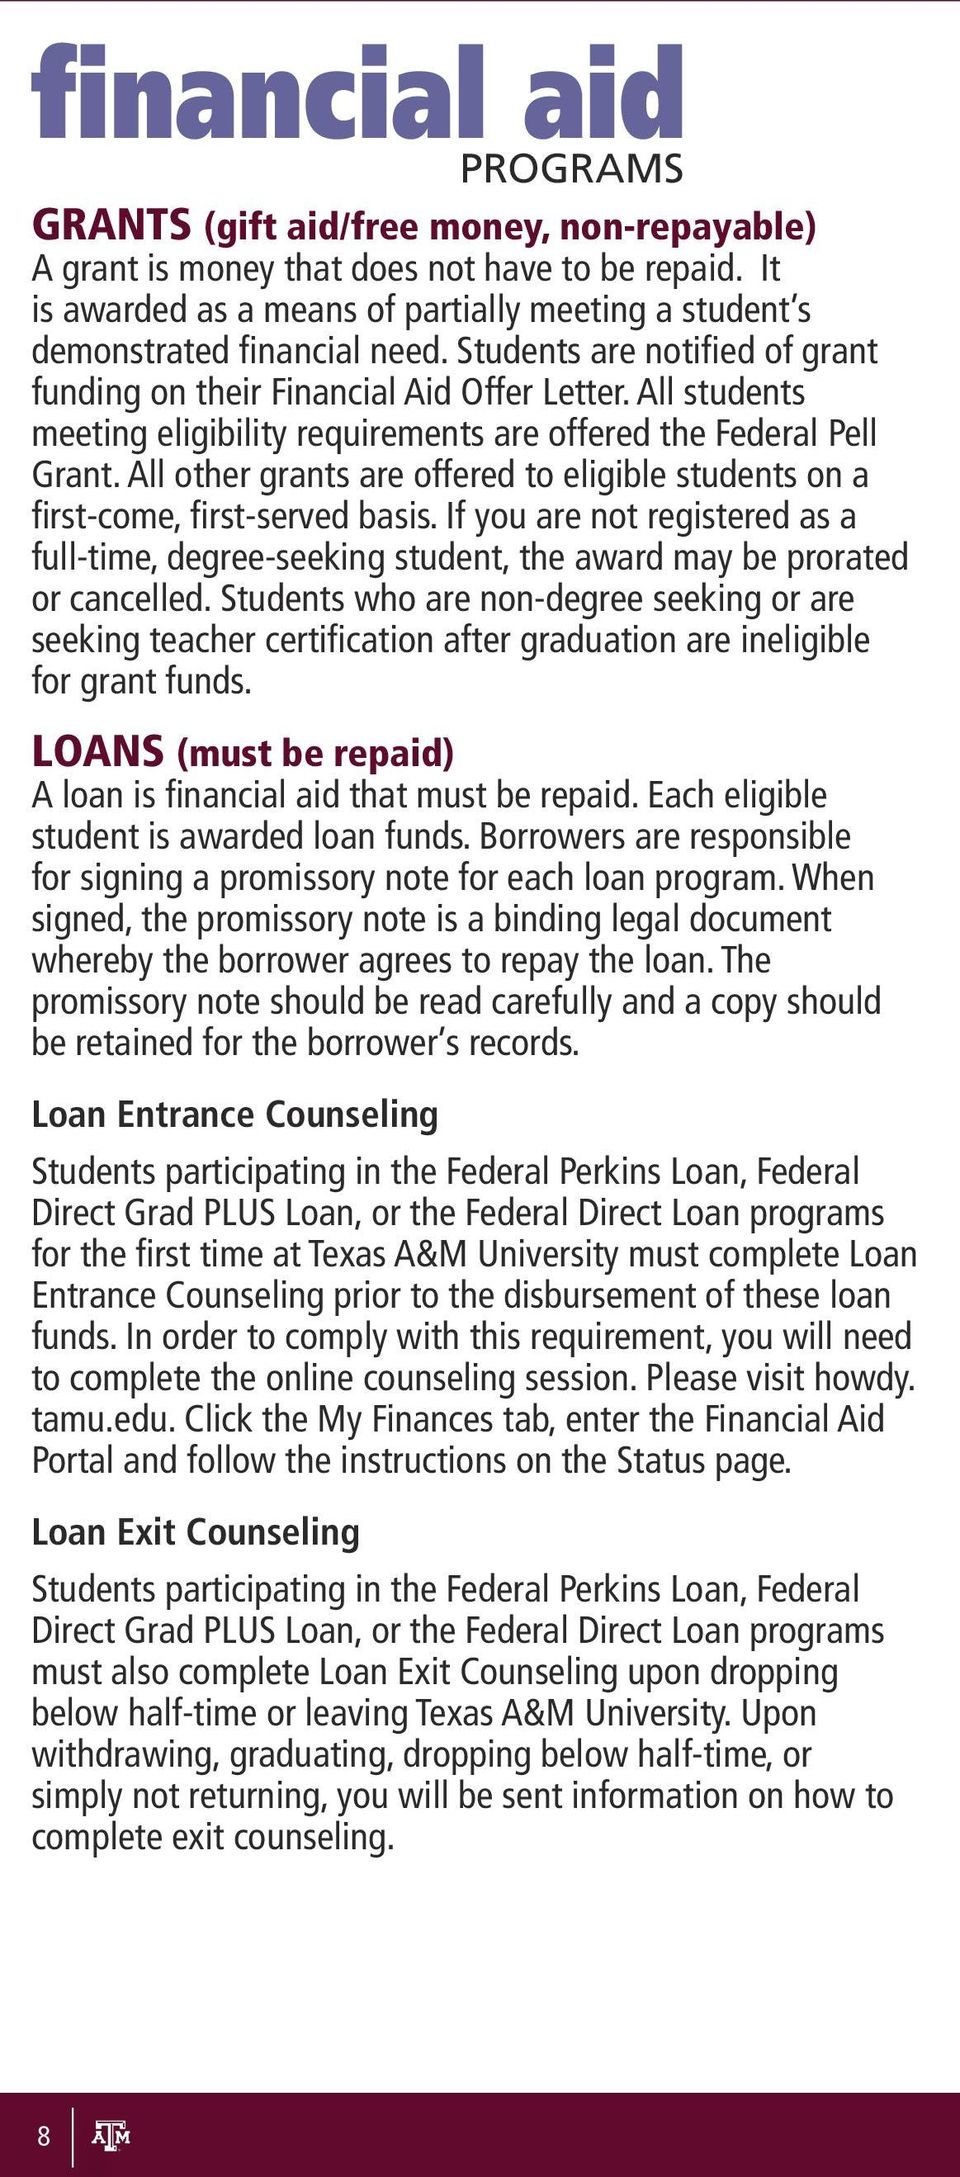 All students meeting eligibility requirements are offered the Federal Pell Grant. All other grants are offered to eligible students on a first-come, first-served basis.